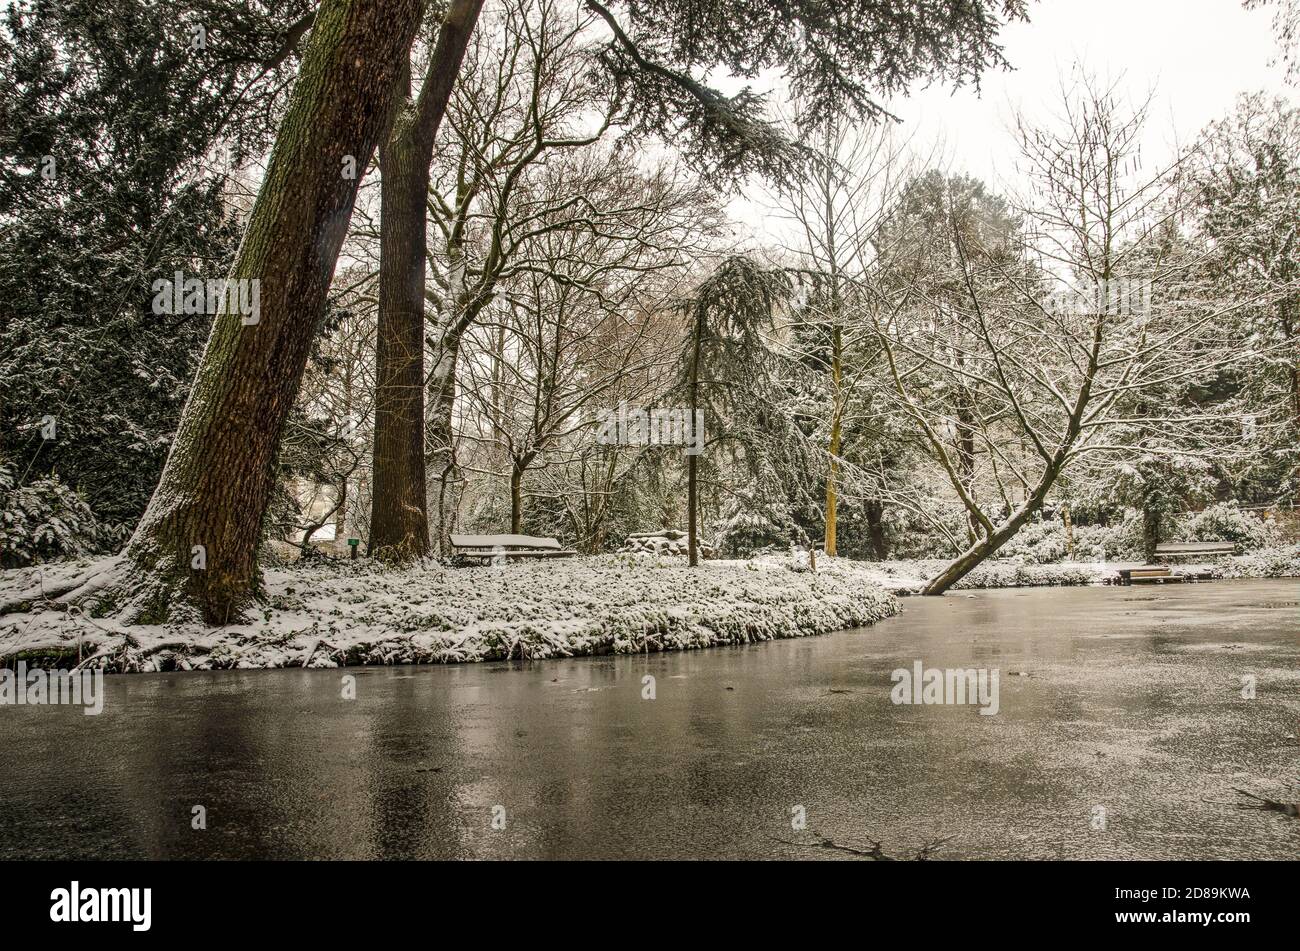 Rotterdam, The Netherlands, January 22, 2020: winter scene in Schoonoord Park, with snow-covered trres and bushes reflecting in a frozen pond Stock Photo